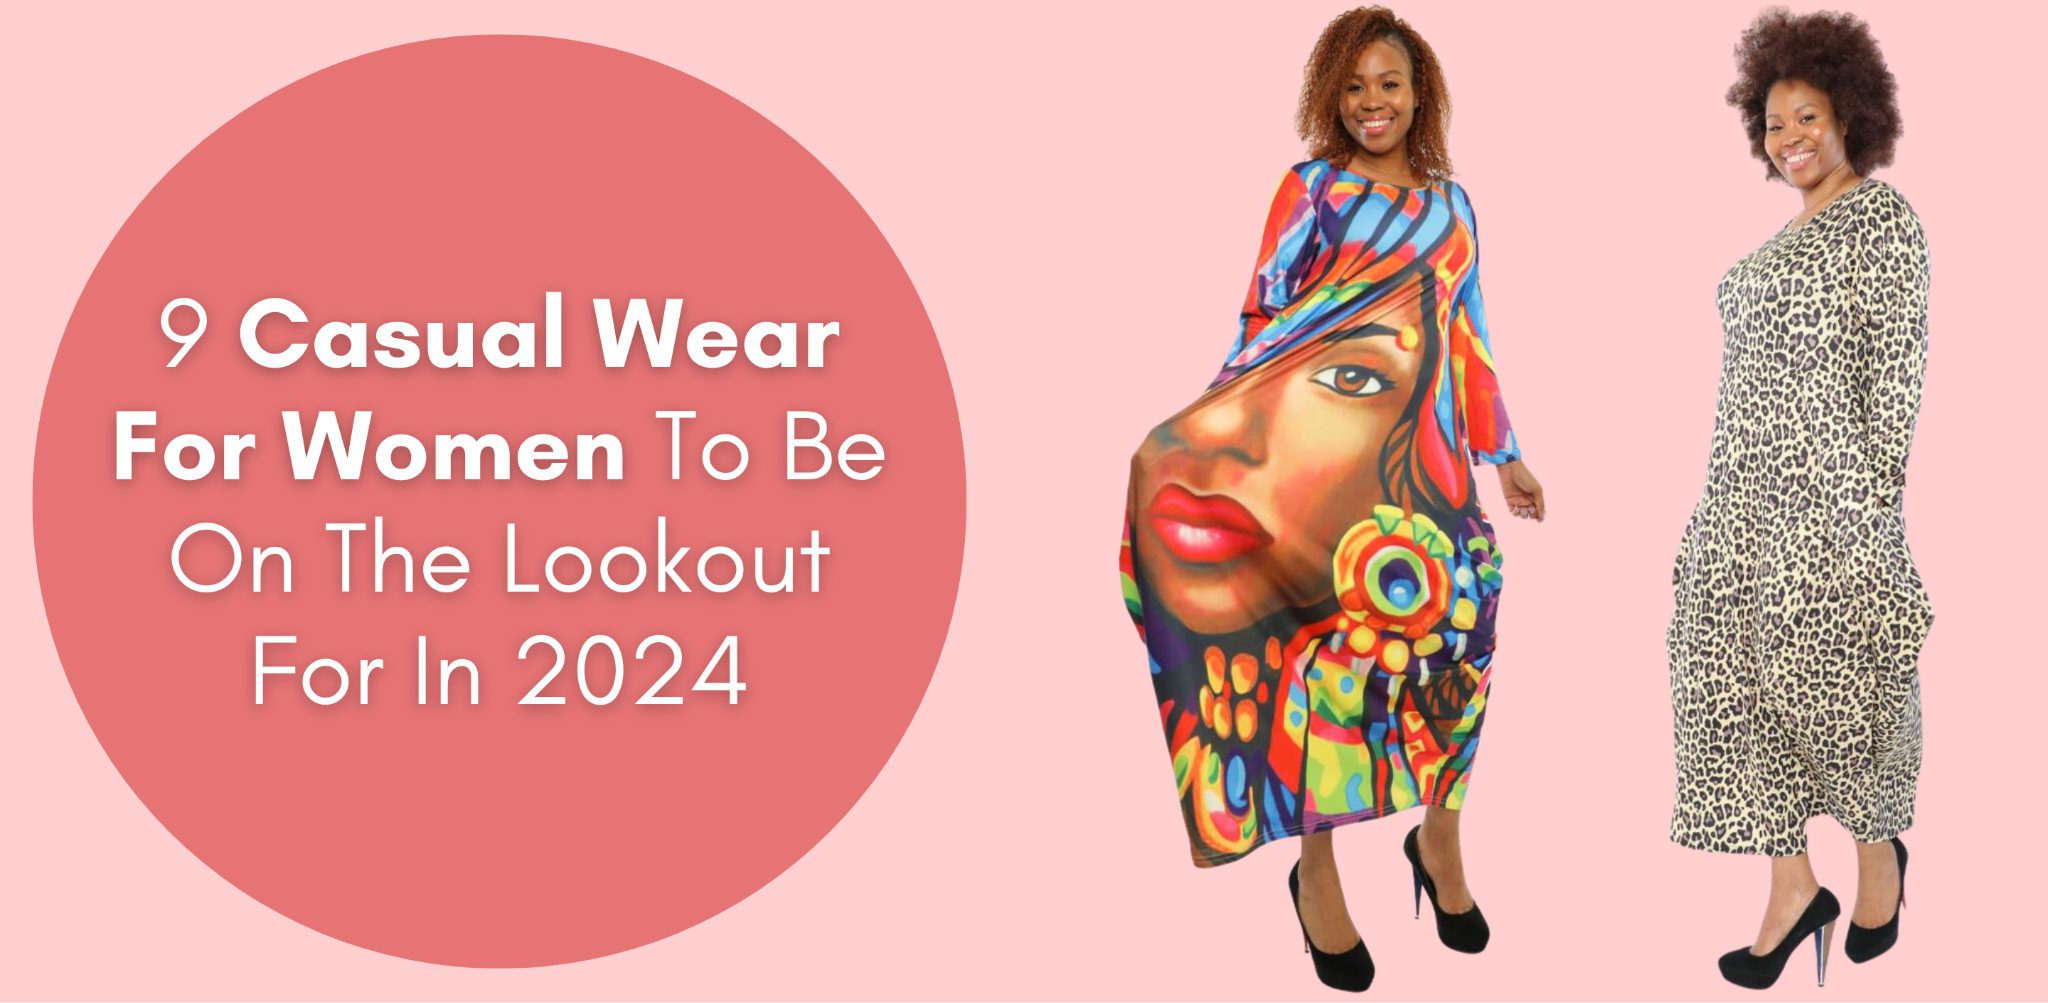 9 Casual Wear For Women To Be On The Lookout For In 2024